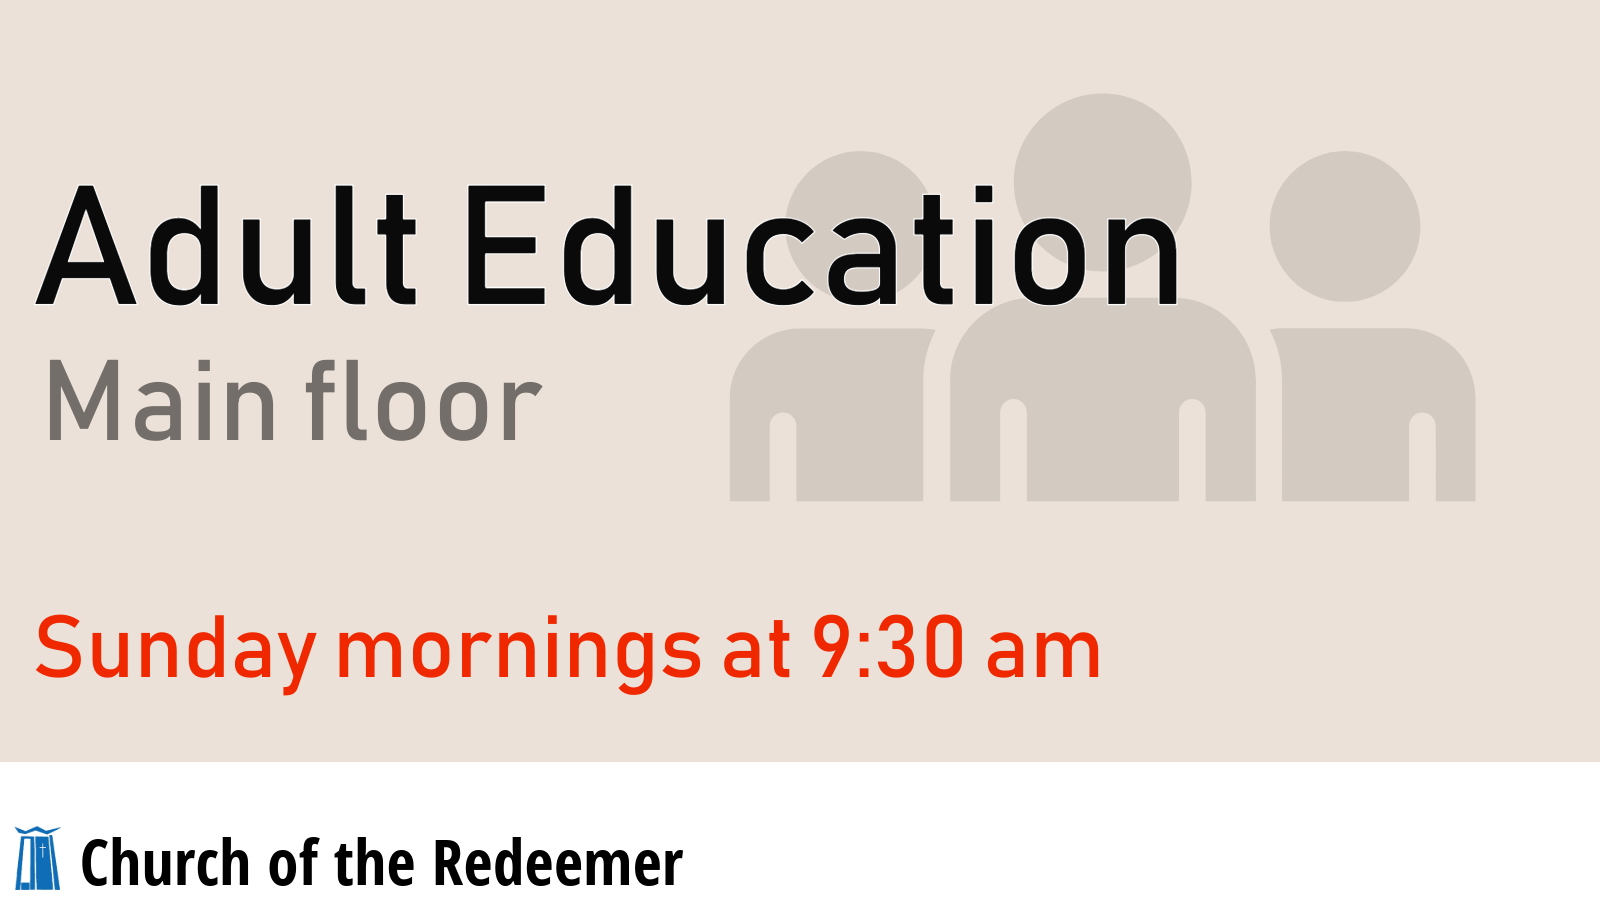 Adult Education at Church of the Redeemer